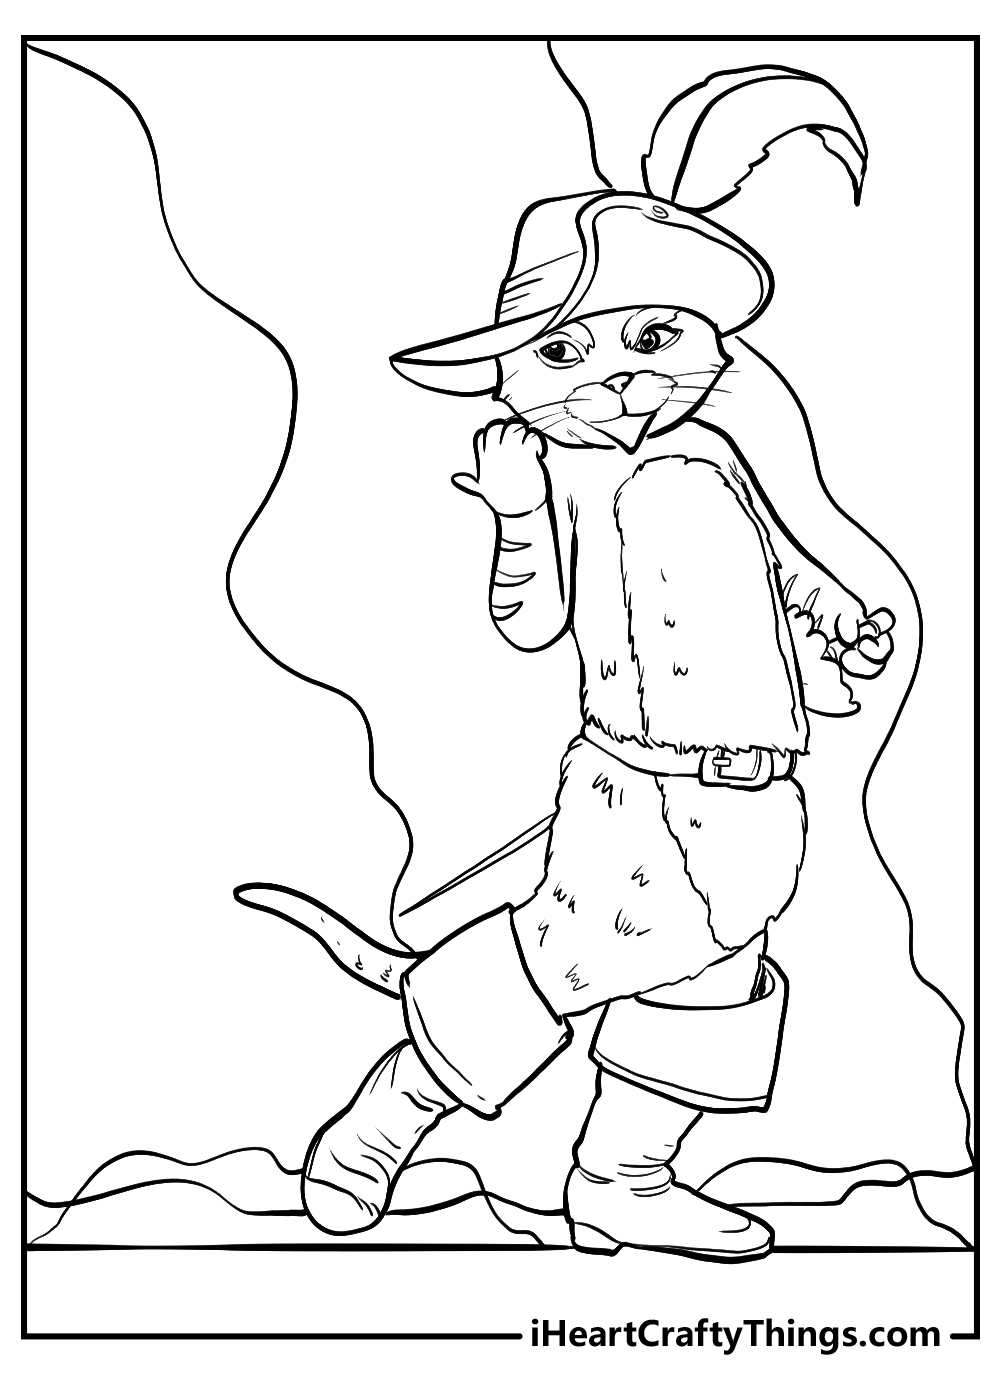 Printable puss in boots coloring pages updated